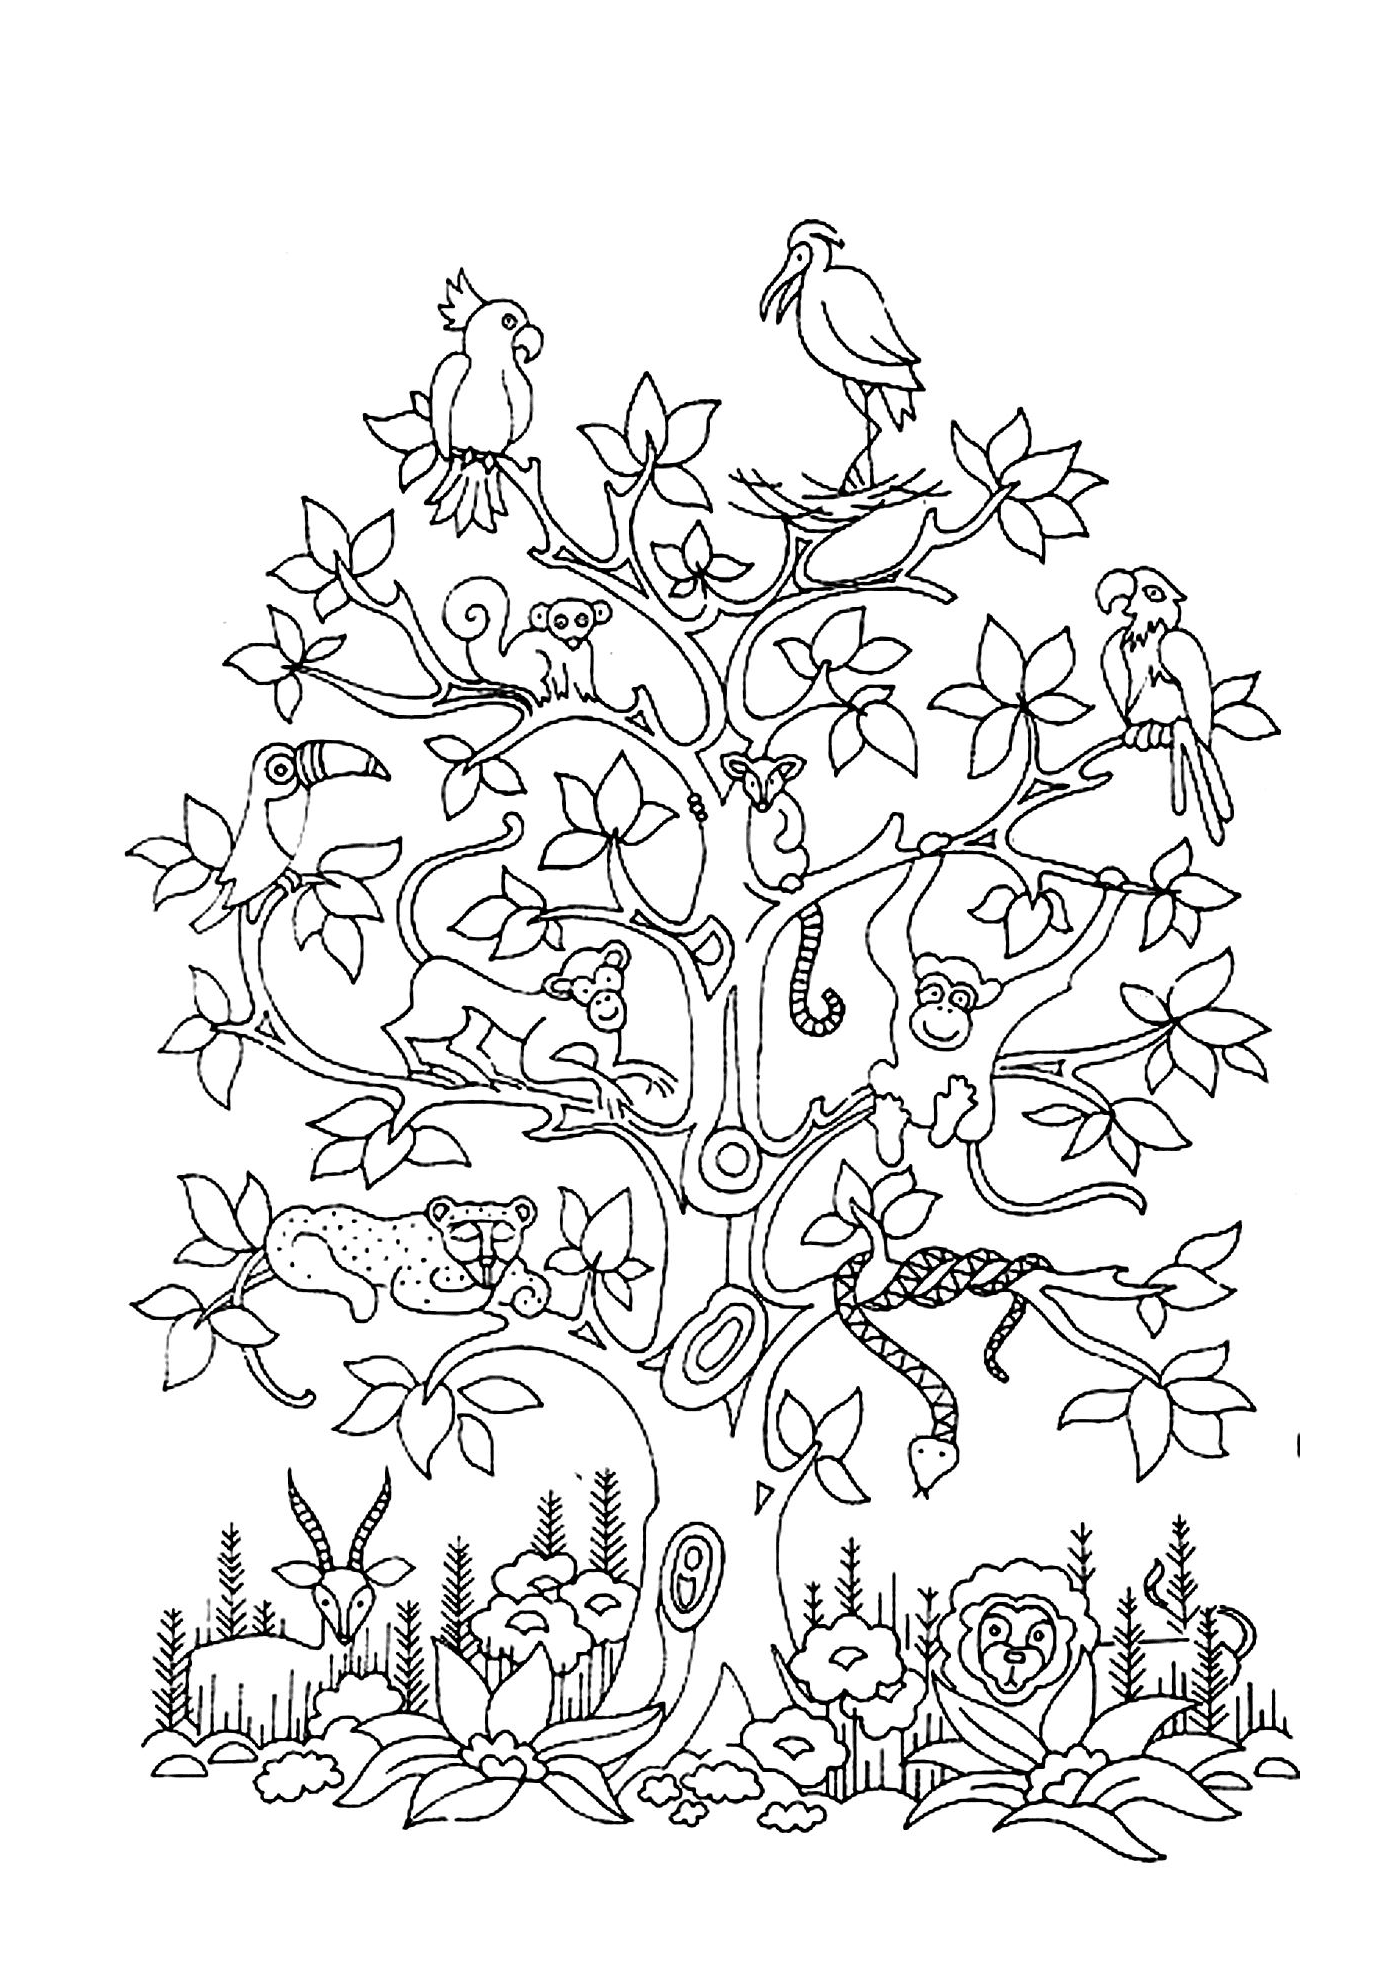  A tree with birds 